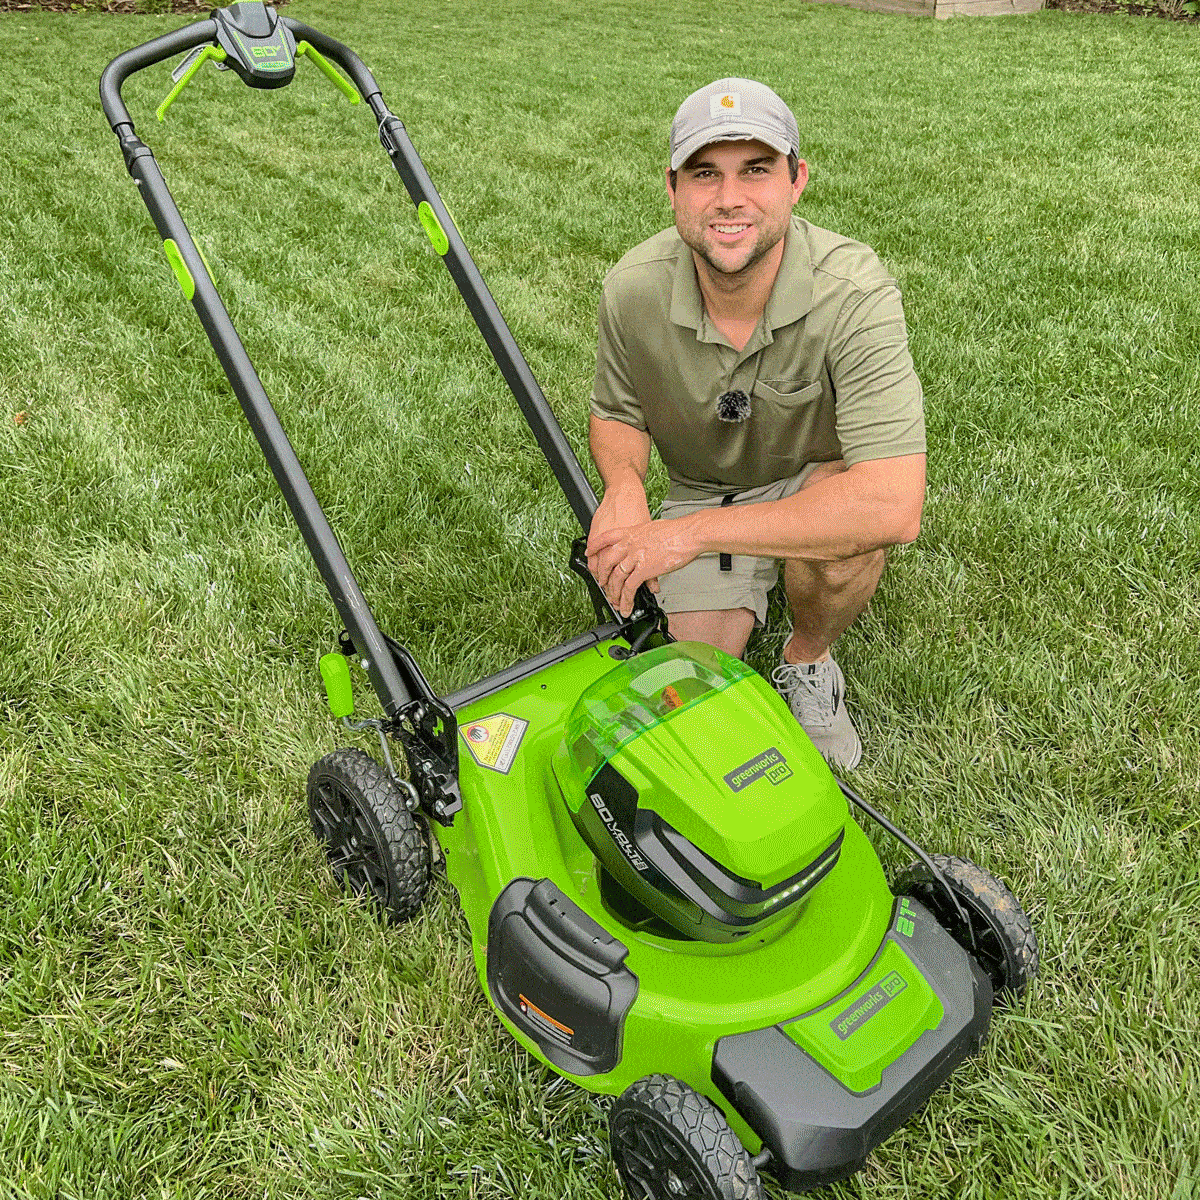 7 Best Lawn Mowers for Small Yards, According to a Lawn Expert